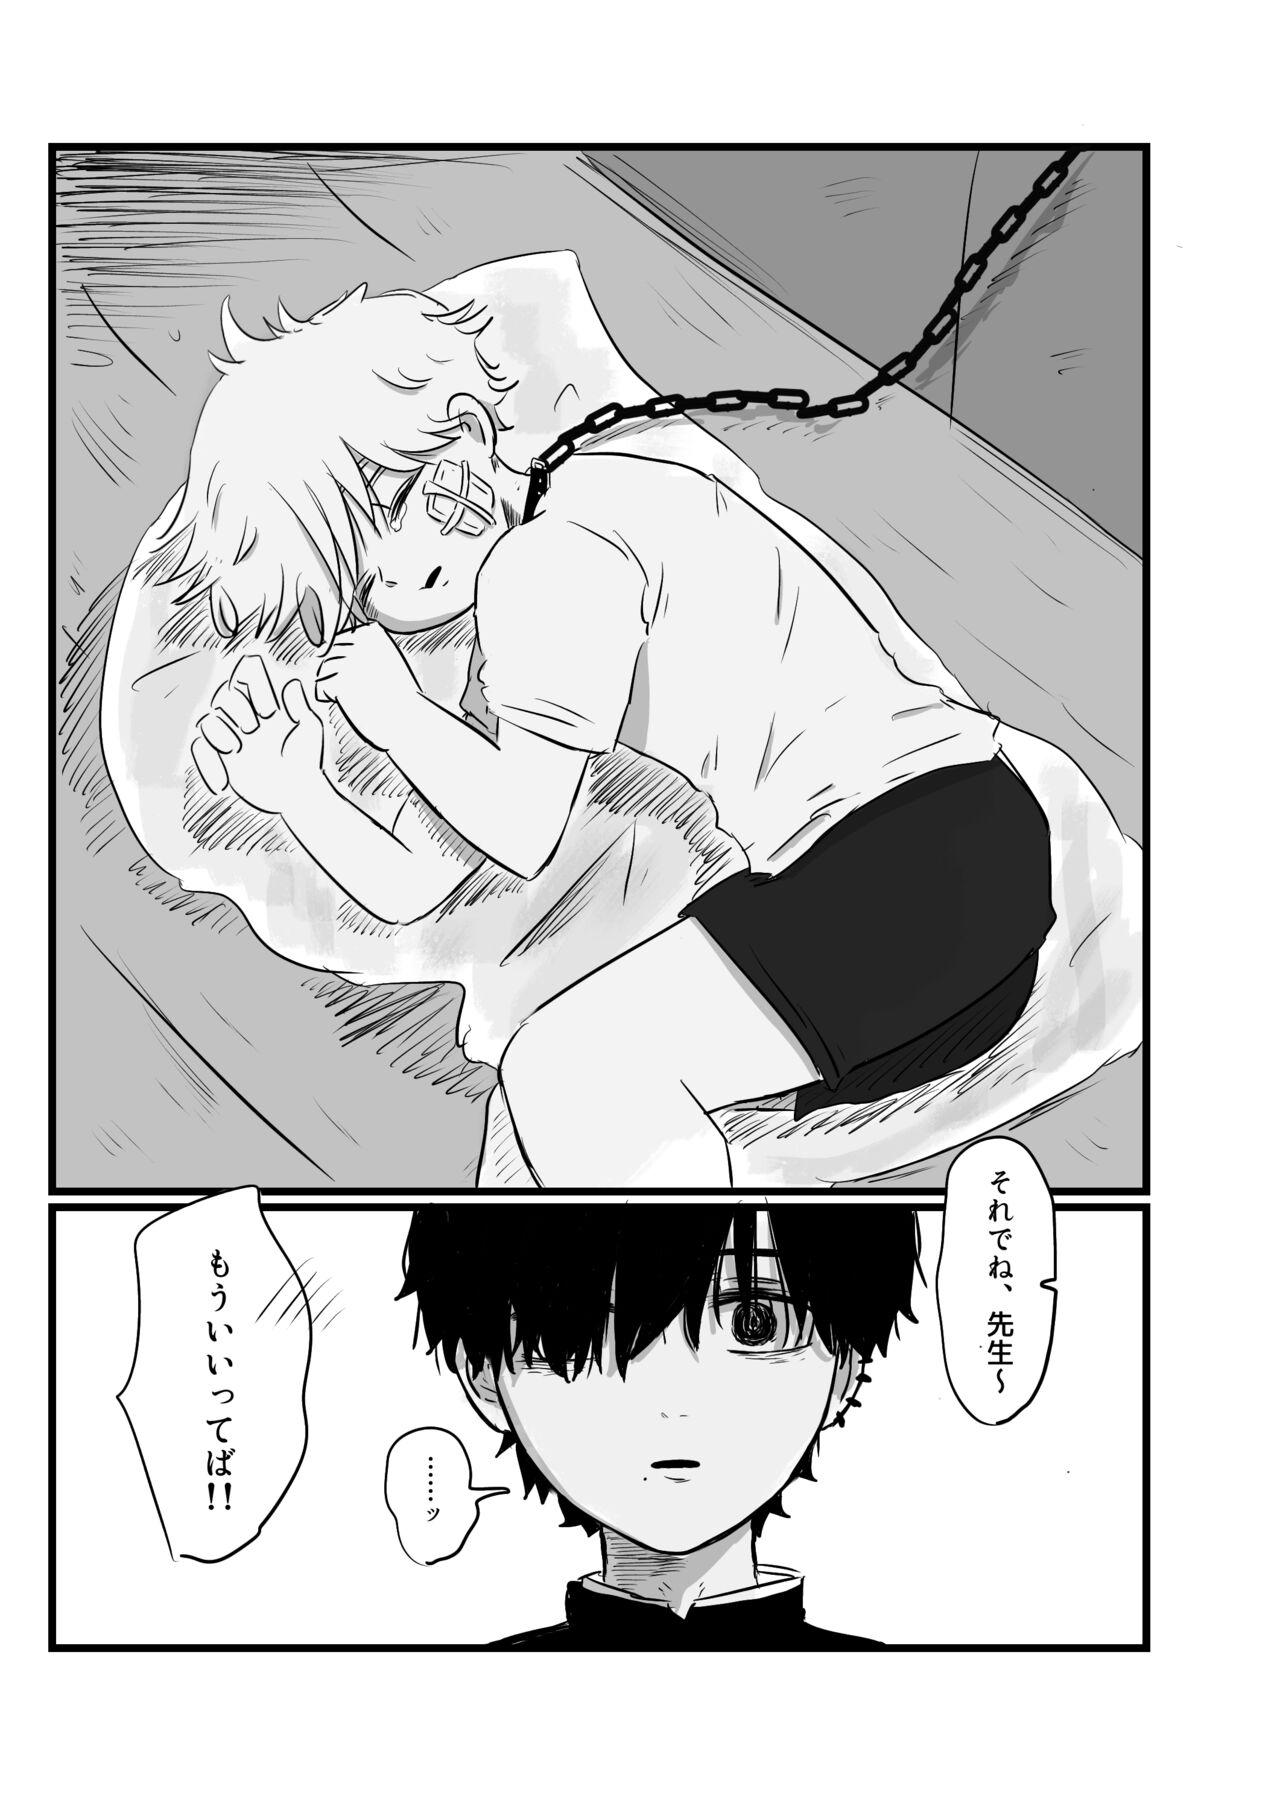 Eating Pussy Akarui Mirai - Chainsaw man Yanks Featured - Page 4